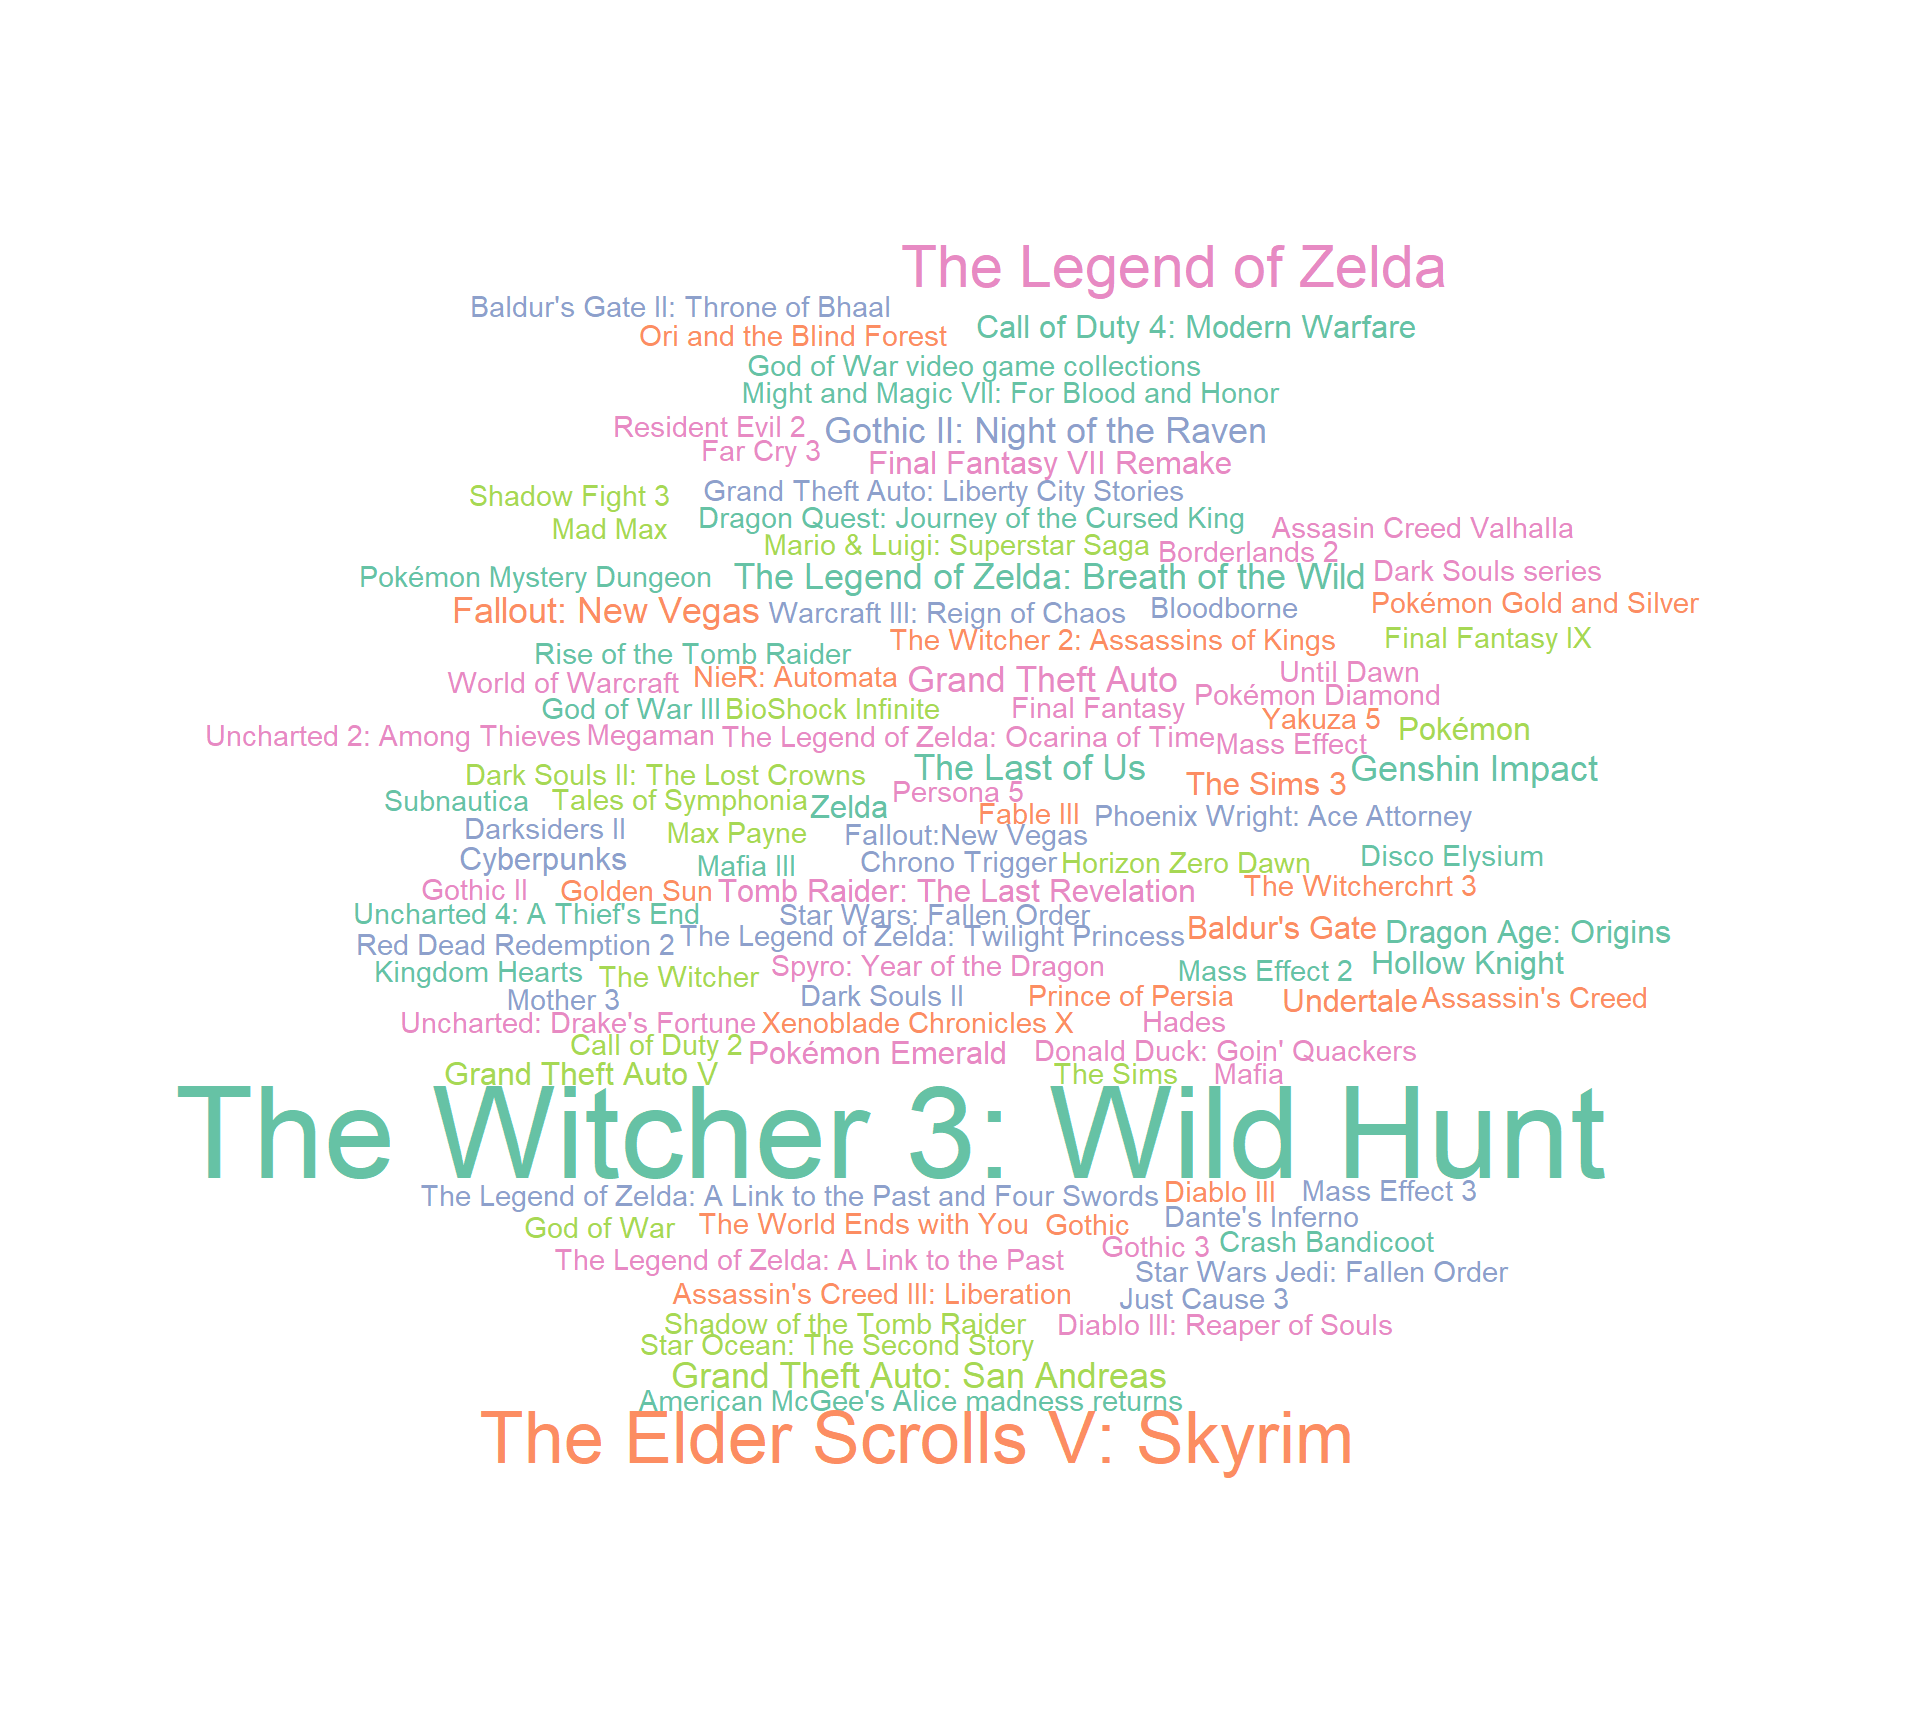 Word Cloud for Game Titles for the Social Surrogate Condition